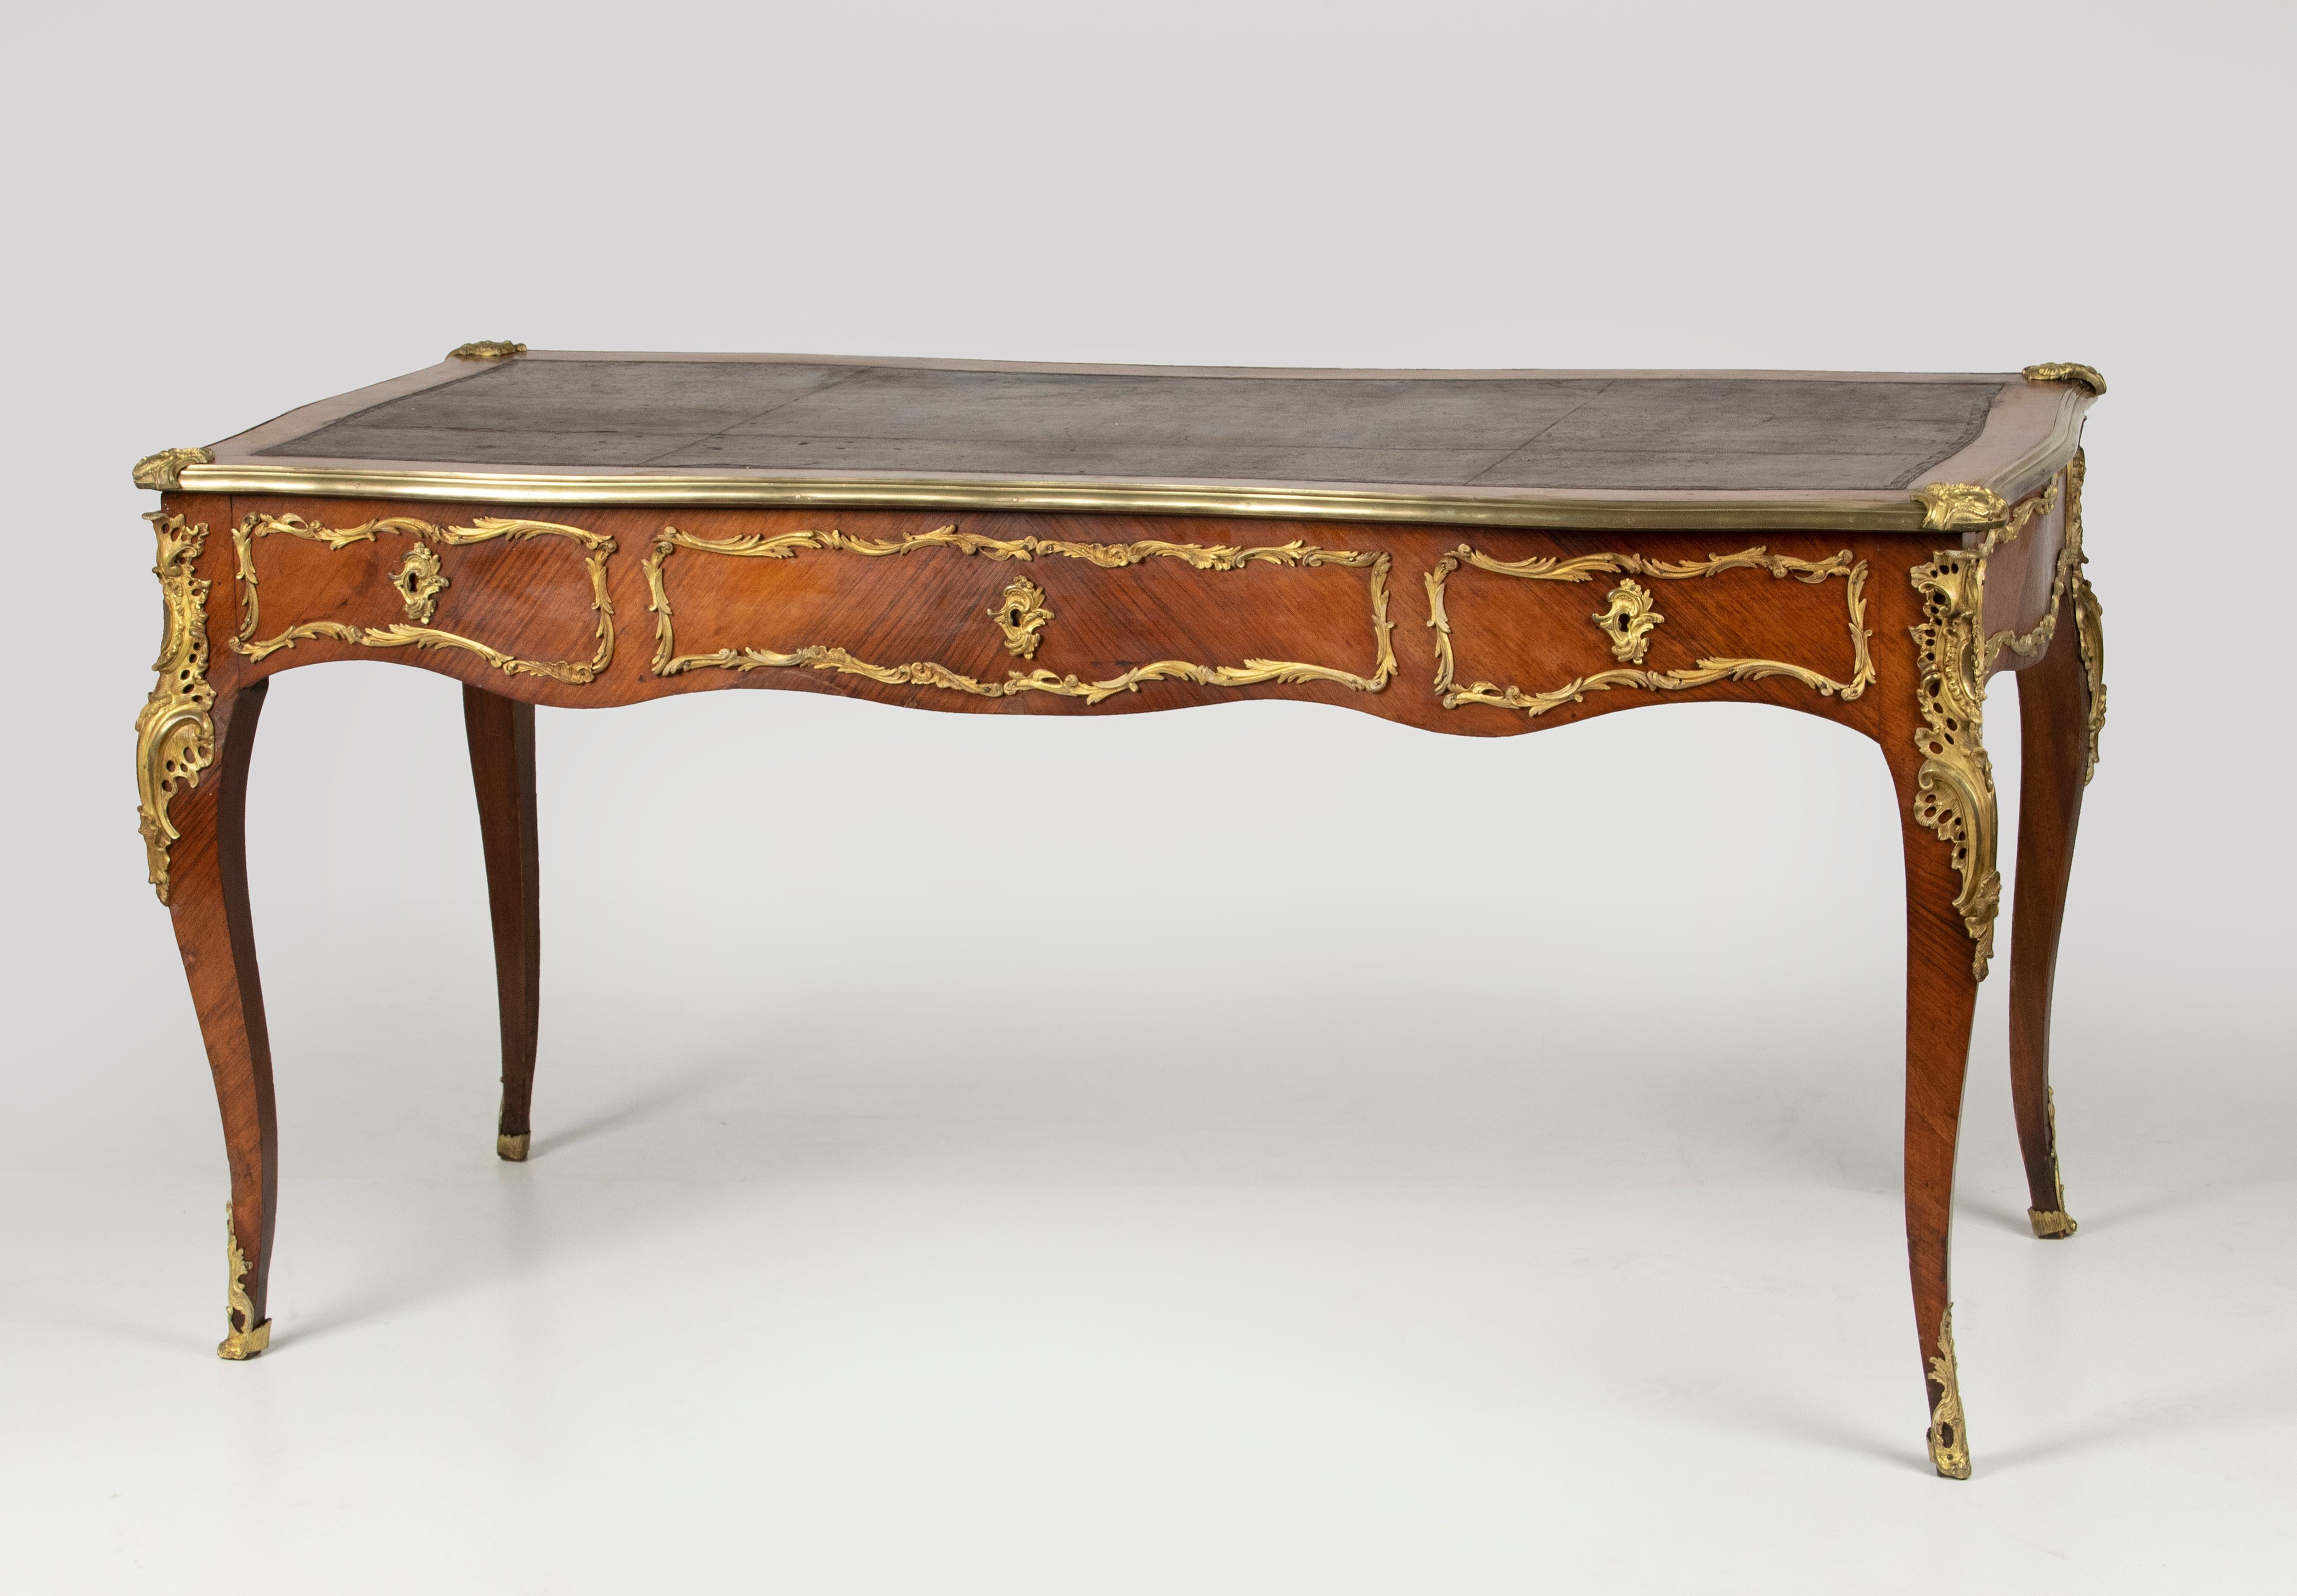 An elegant antique French desk/writing table in Louis XV style. Also called 